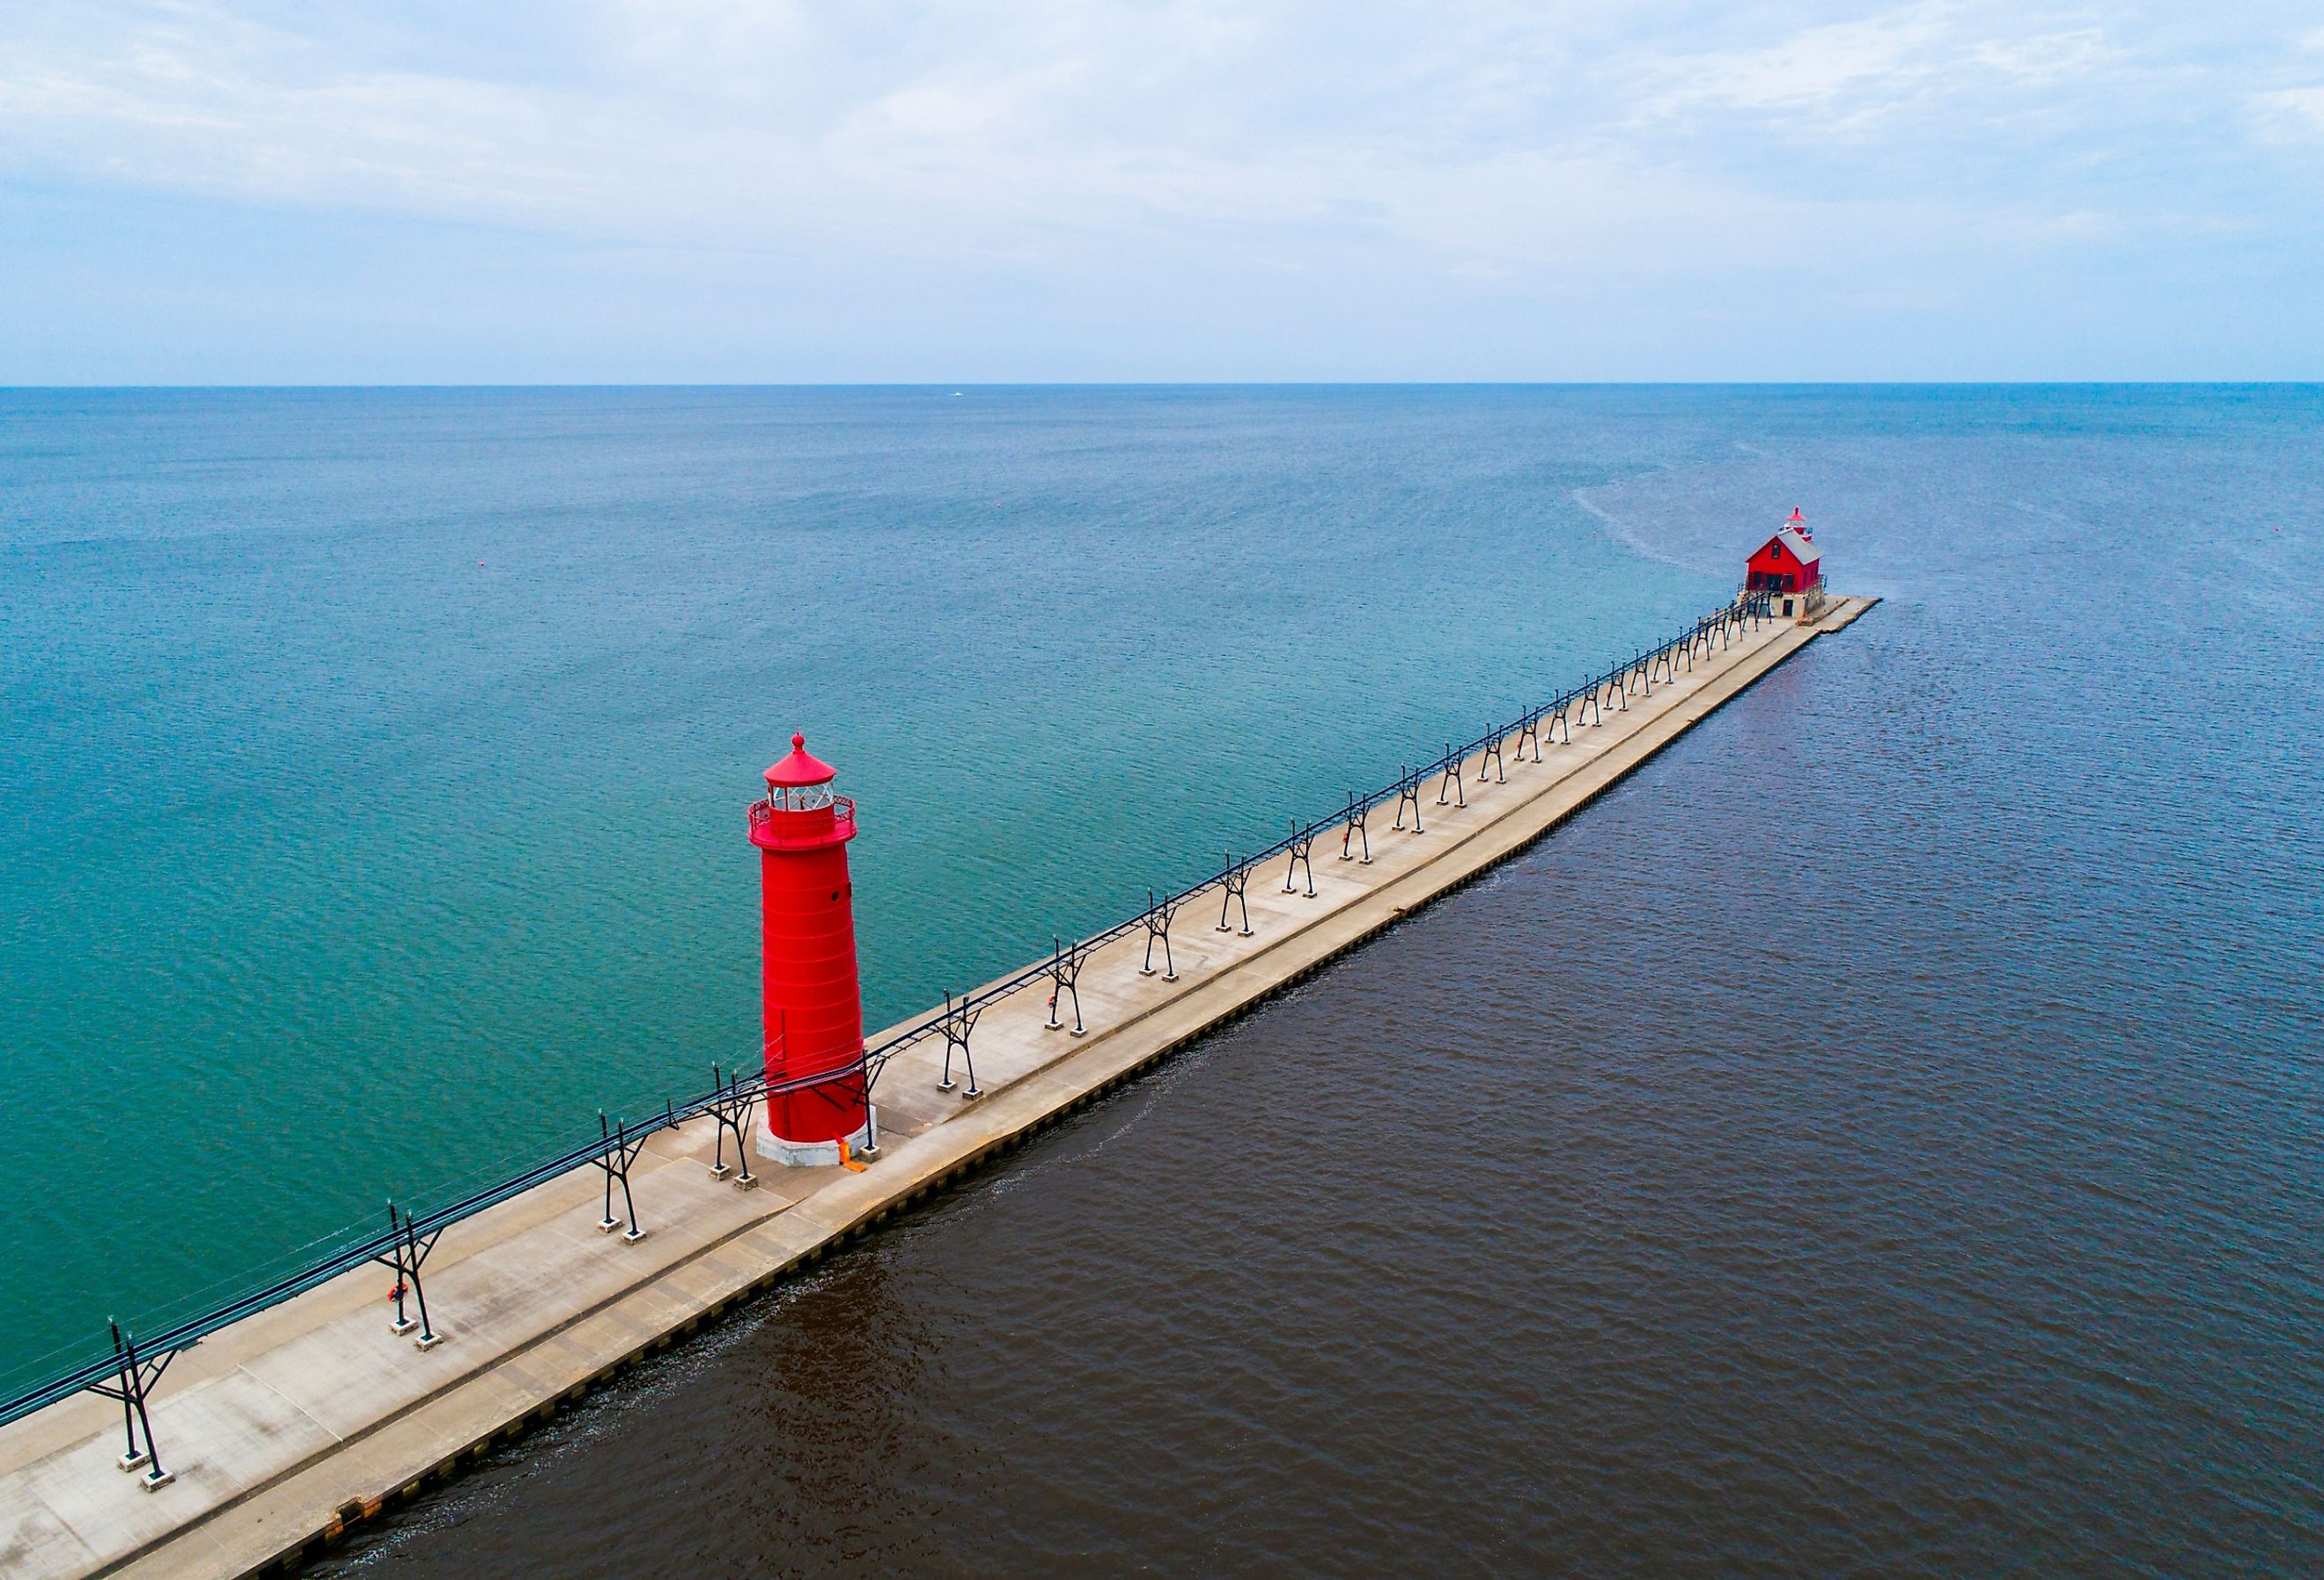 Aerial view of Grand Haven, Michigan lighthouse. Image credit Dennis MacDonald via Shutterstock.